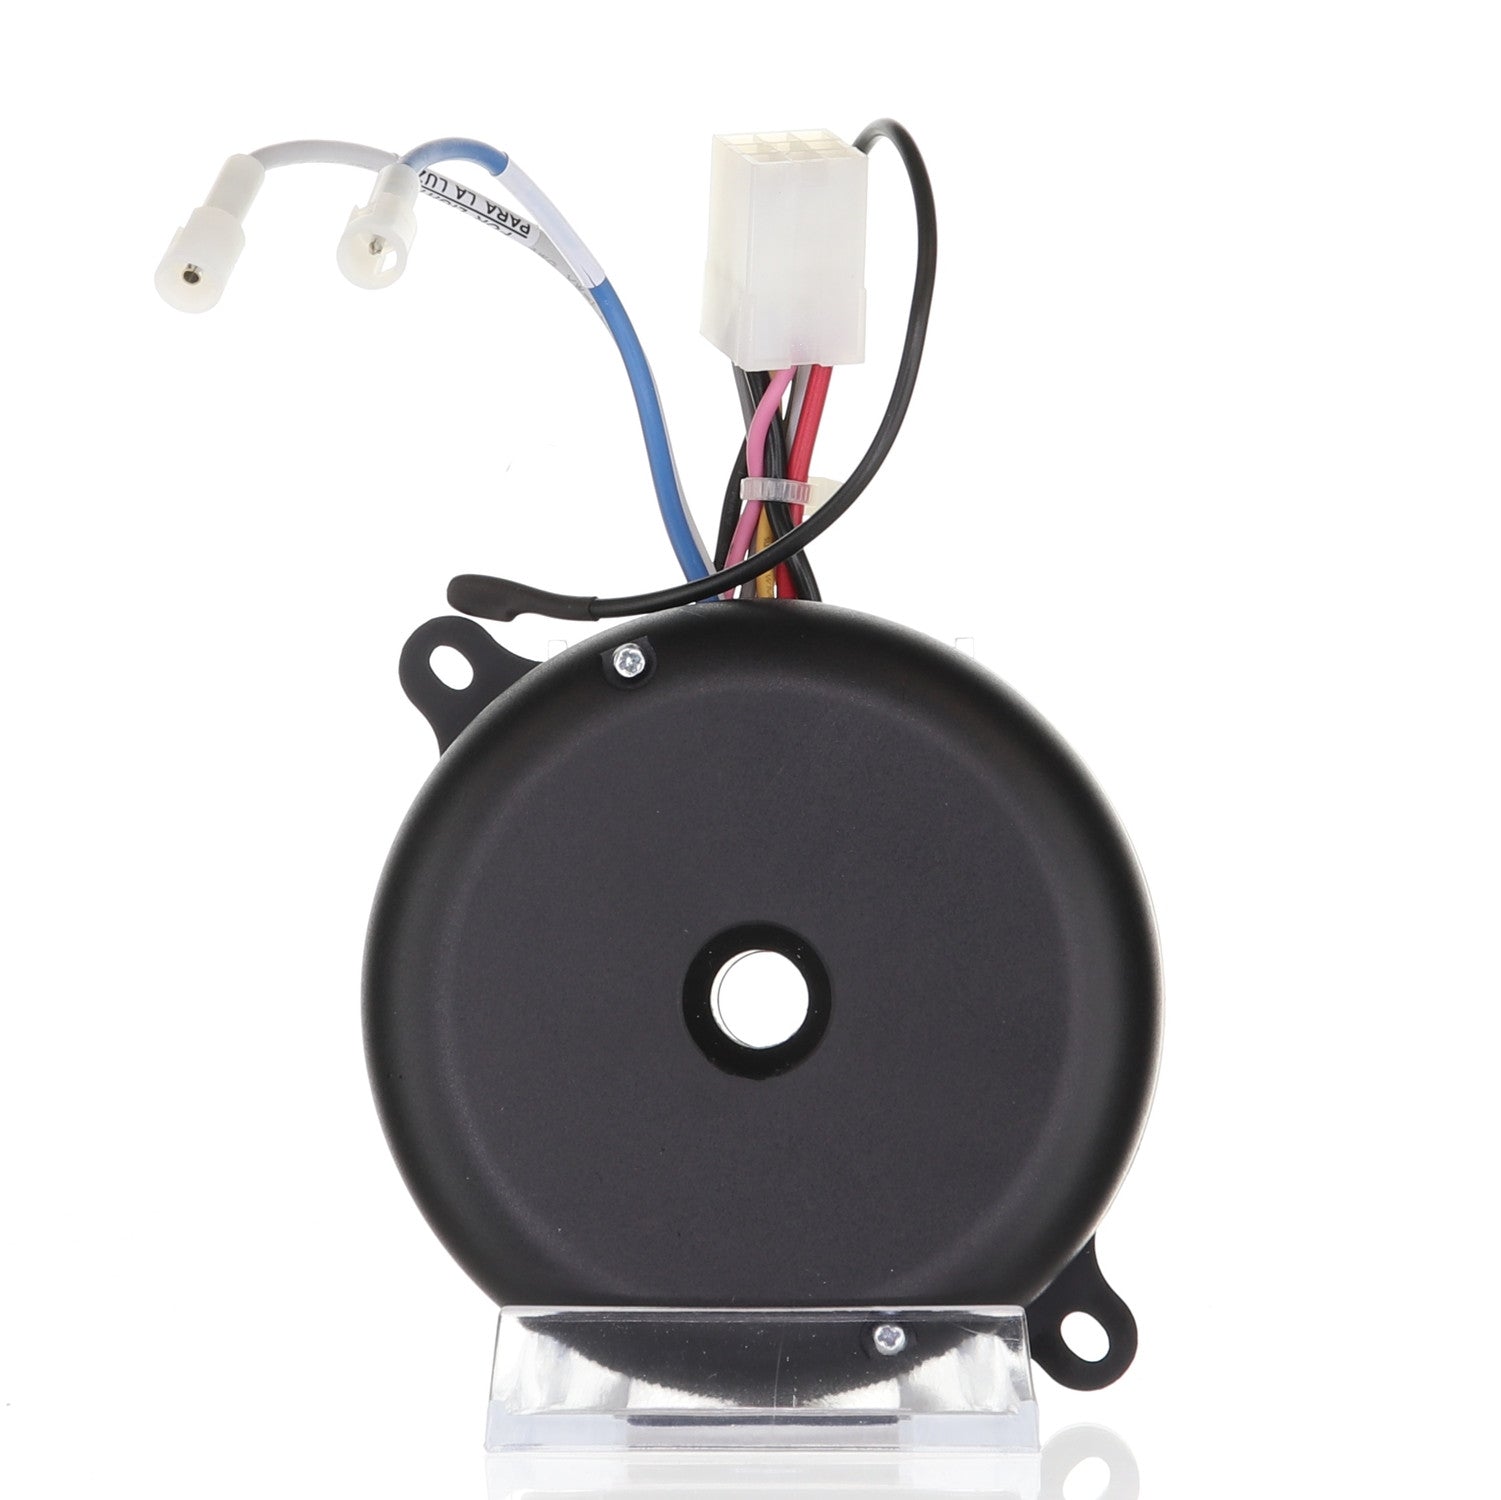 UC7301R-01 Replacement Ceiling Fan Receiver